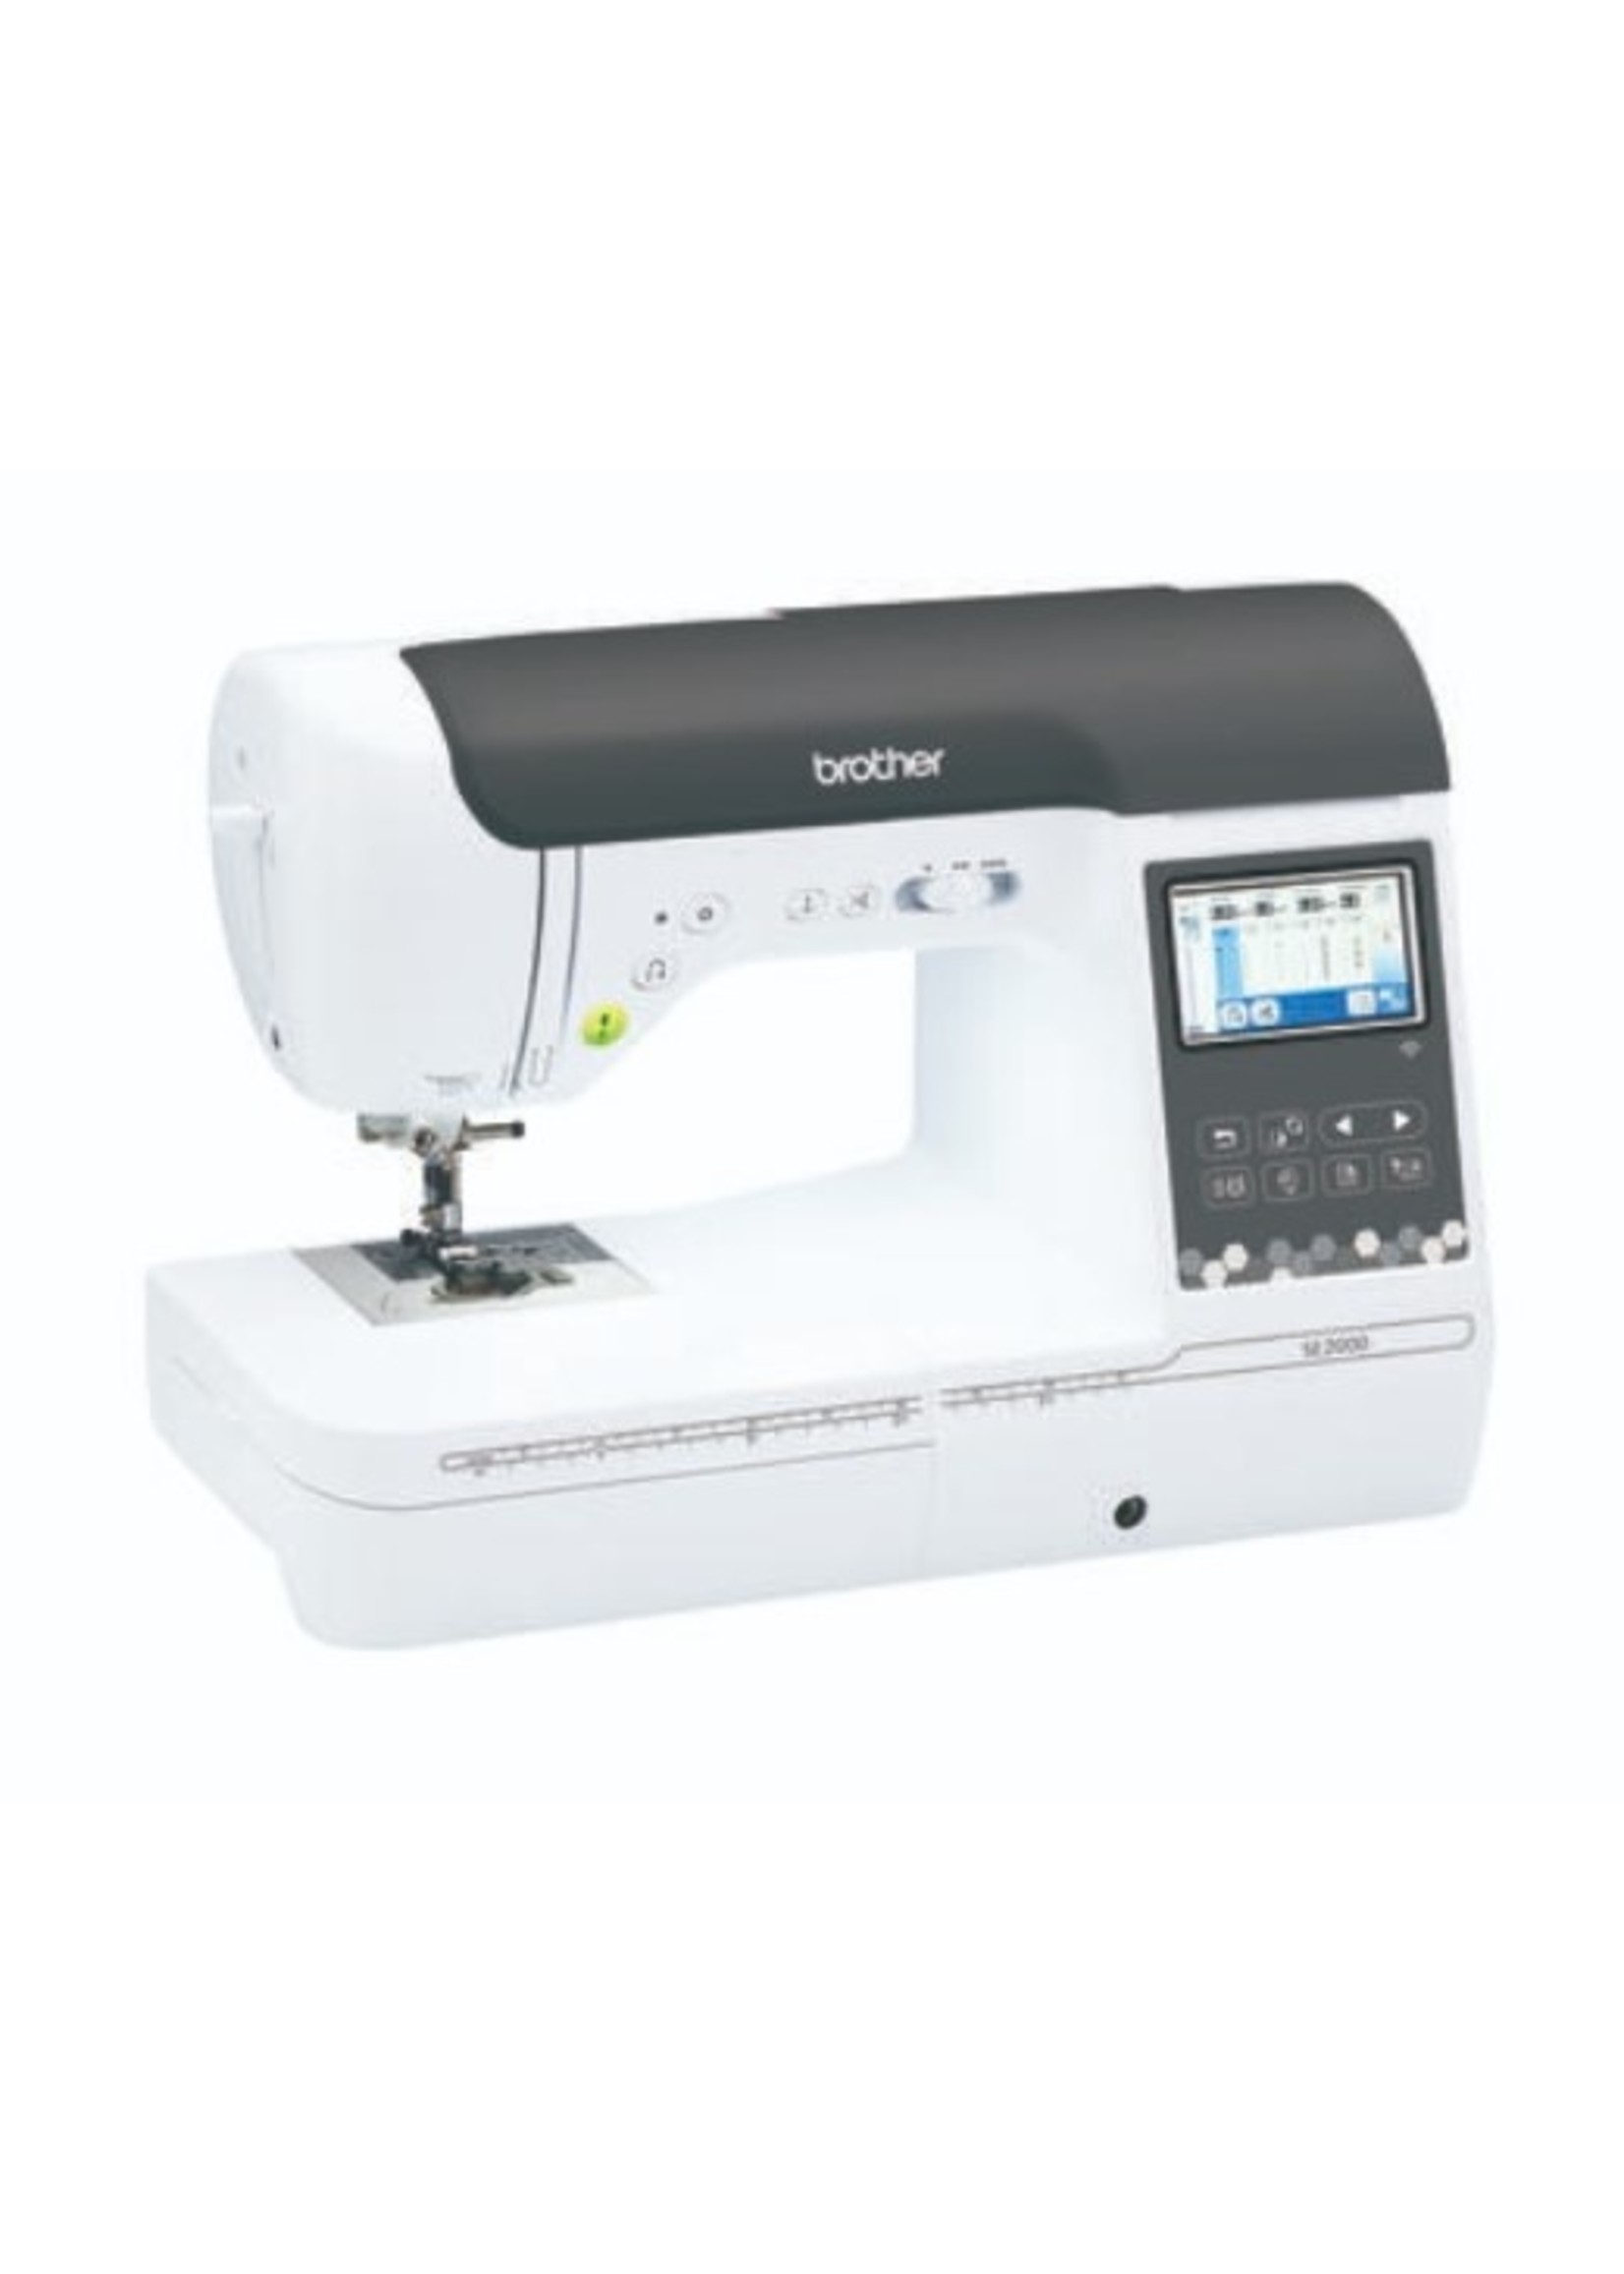 Brother SE2000 sewing and embroidery machine